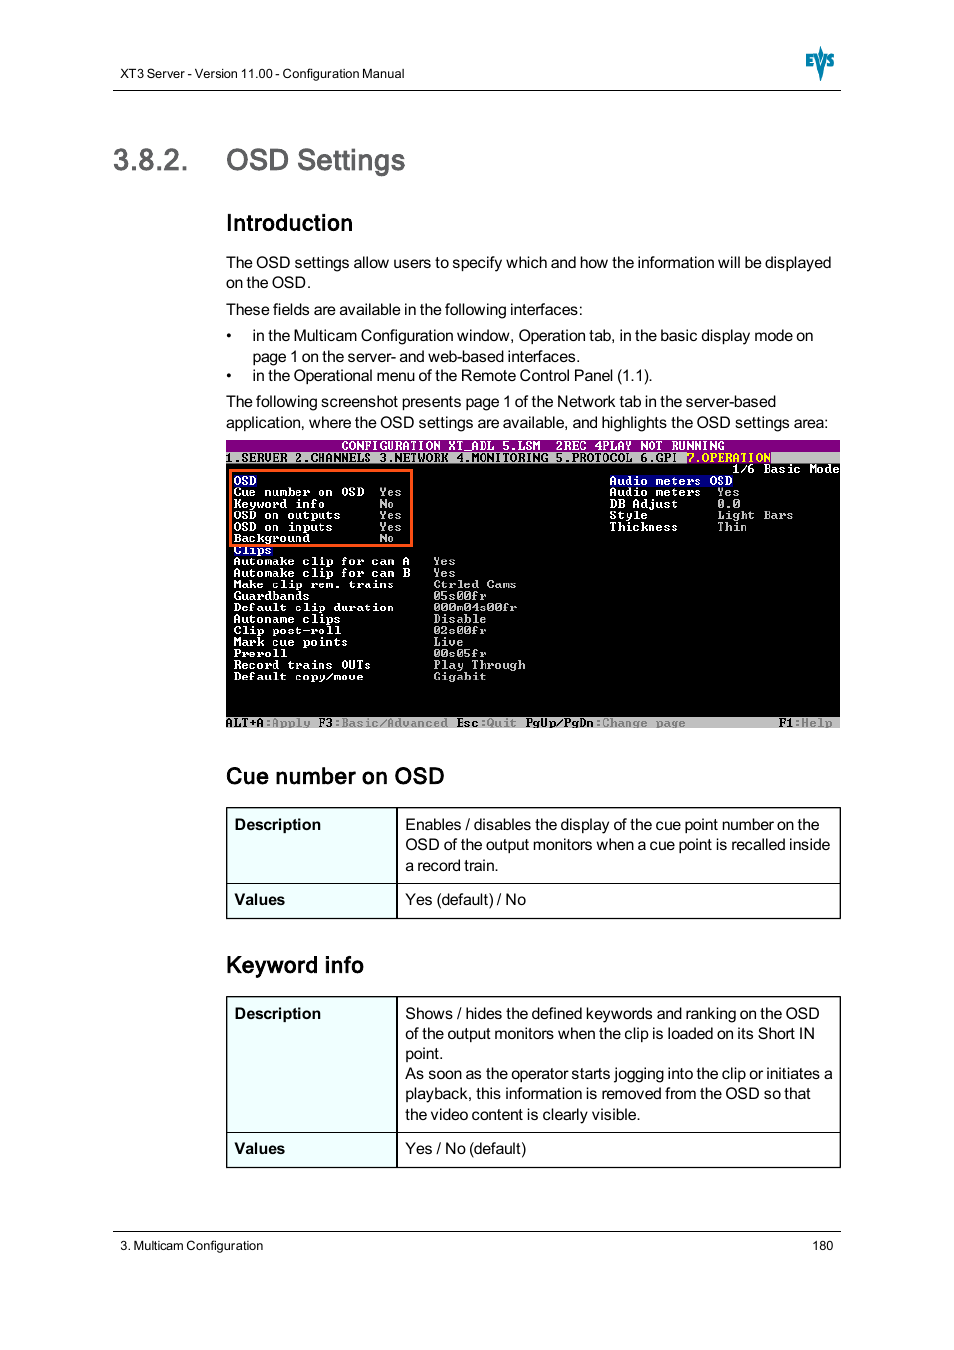 Osd settings, Introduction, Cue number on osd | EVS XT3 Version 11.00  Configuration Manual User Manual | Page 186 / 227 | Original mode